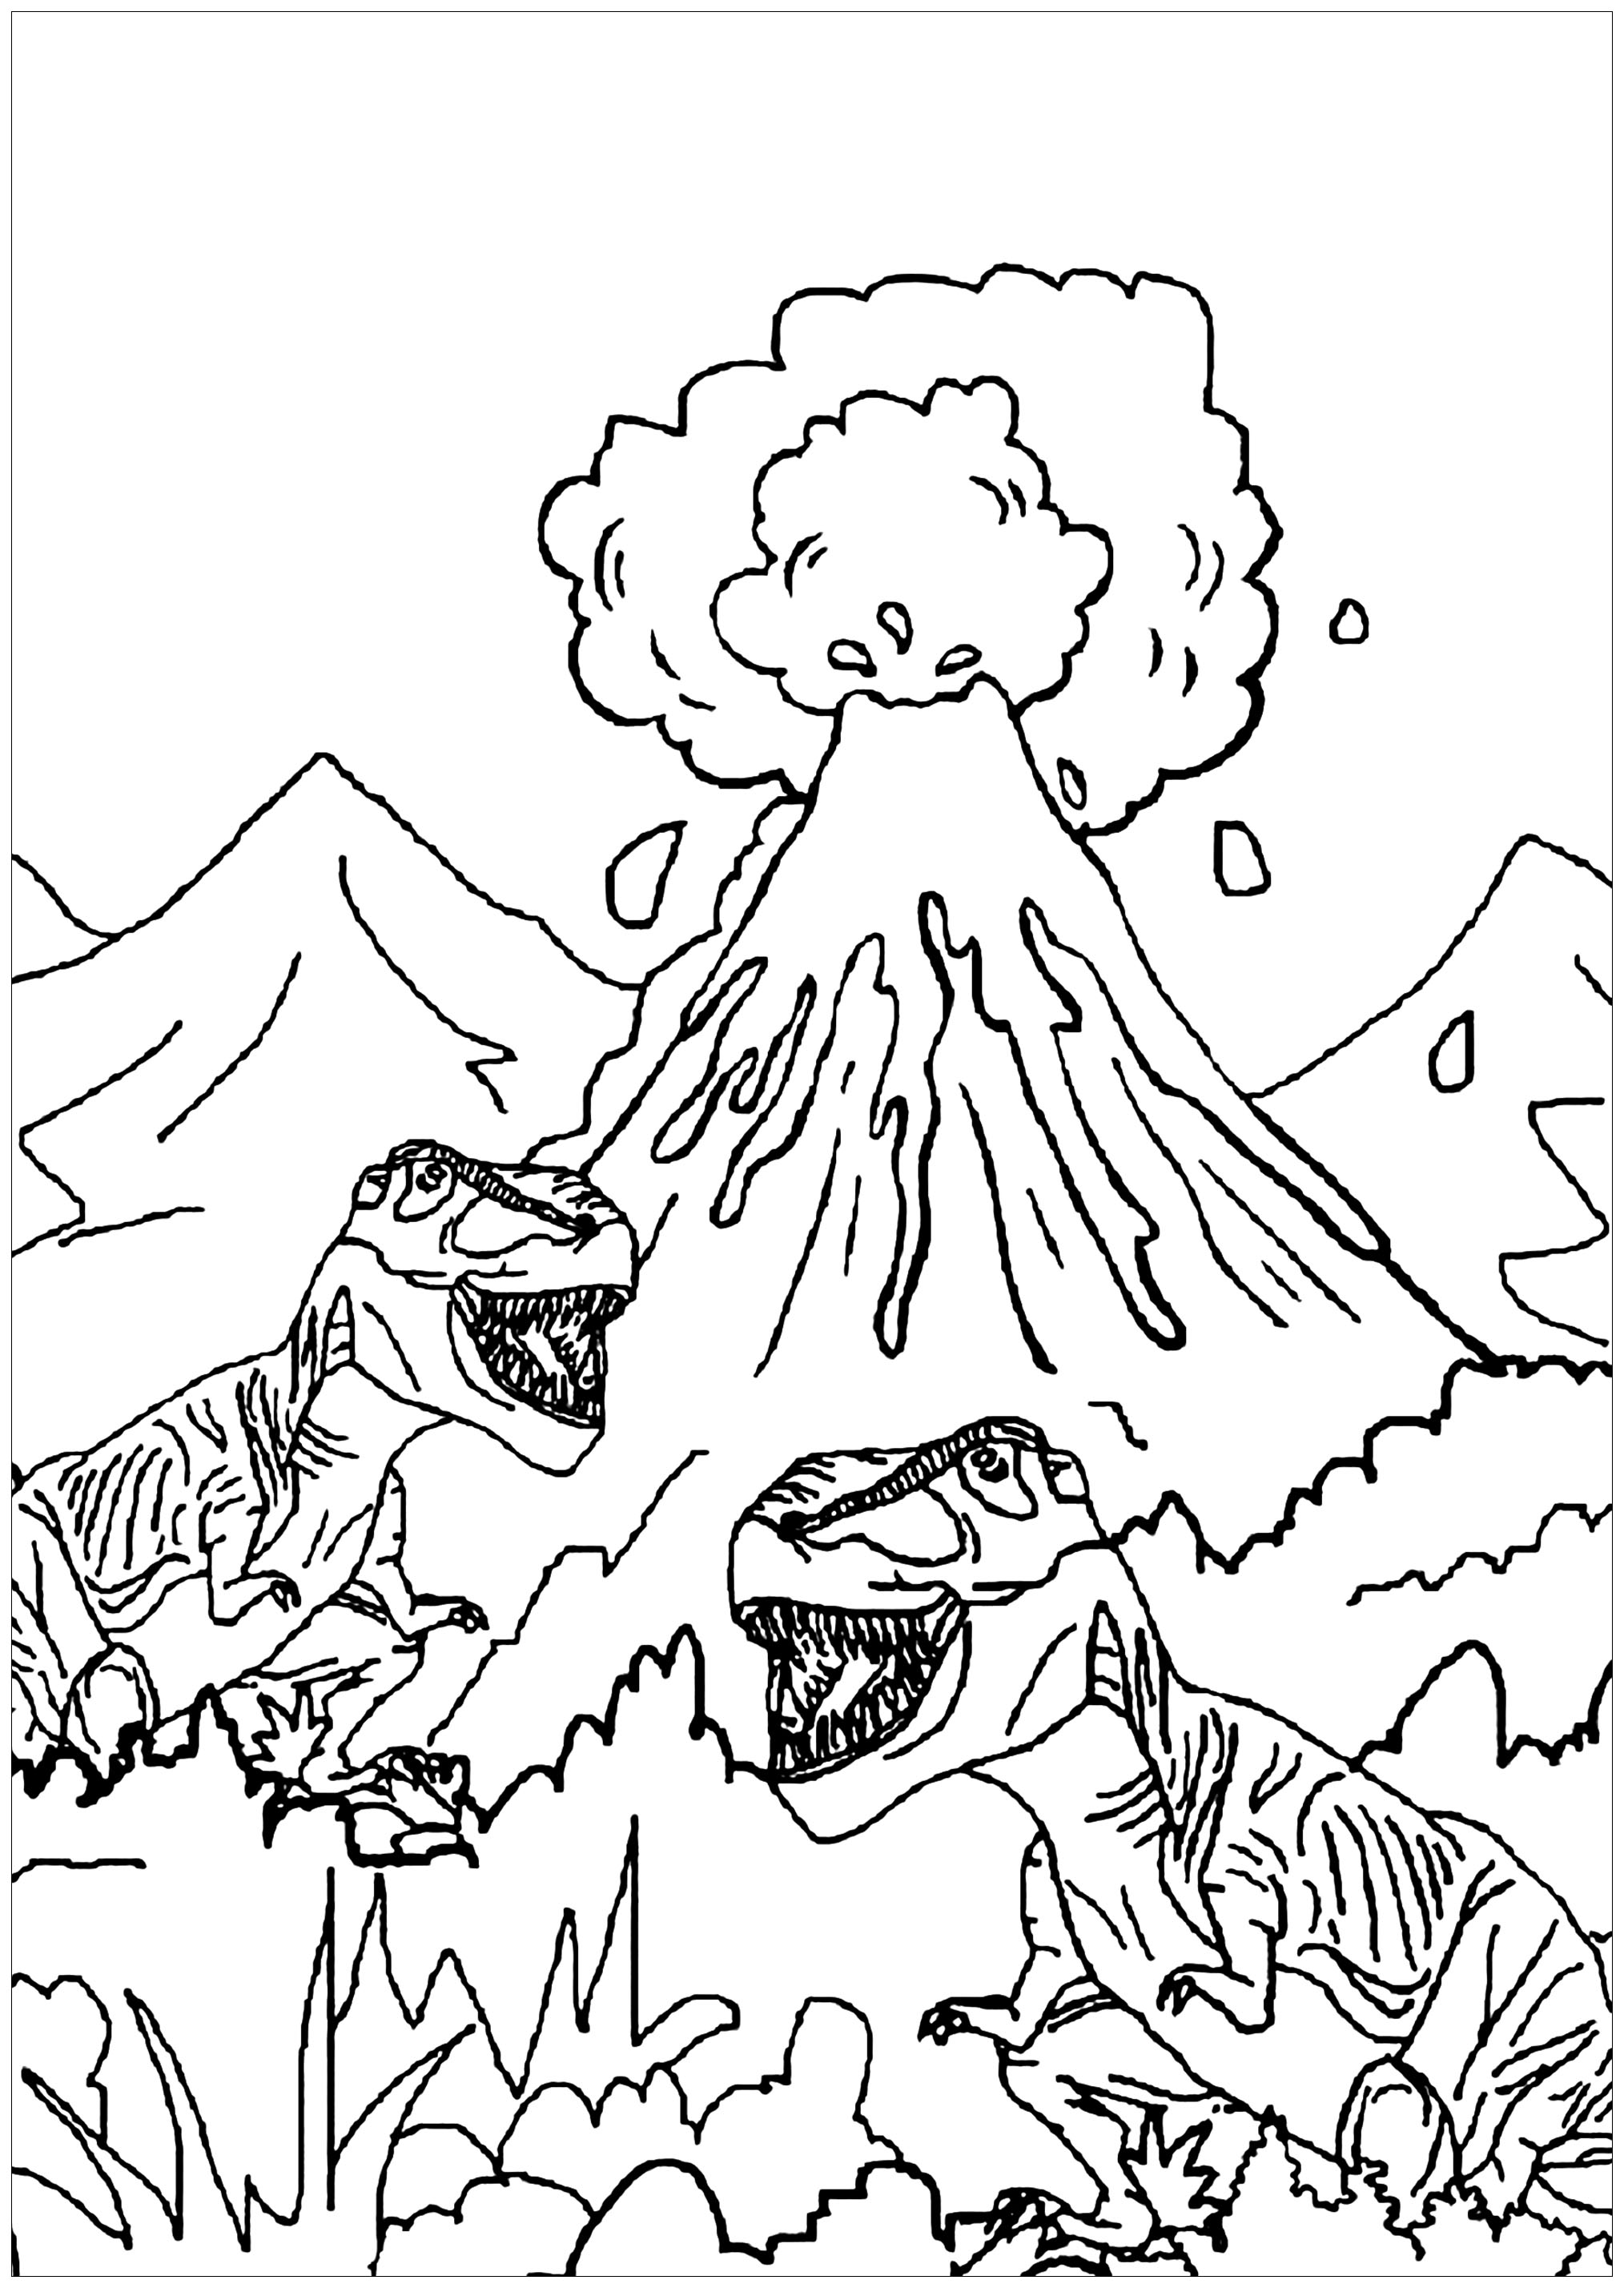 Run out of disaster Coloring Page